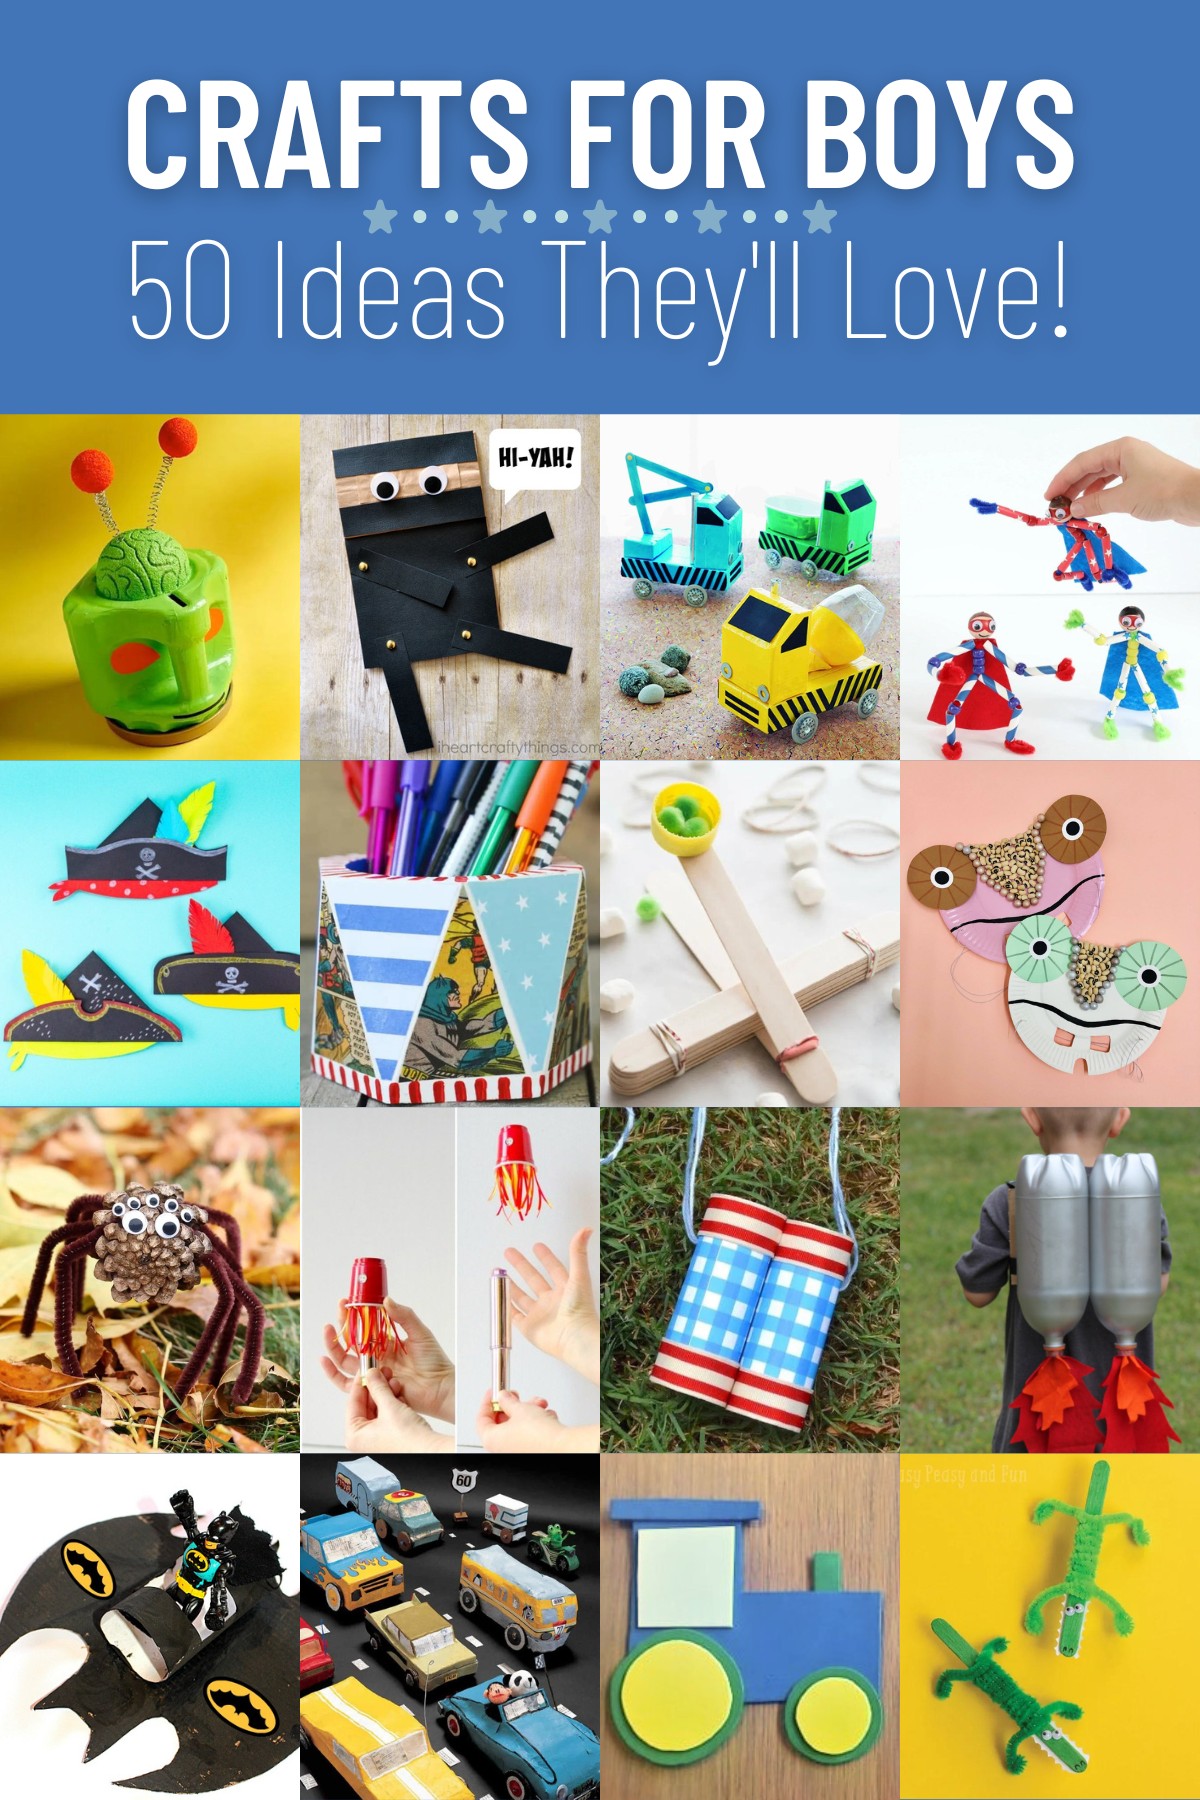 50 crafts for boys to try